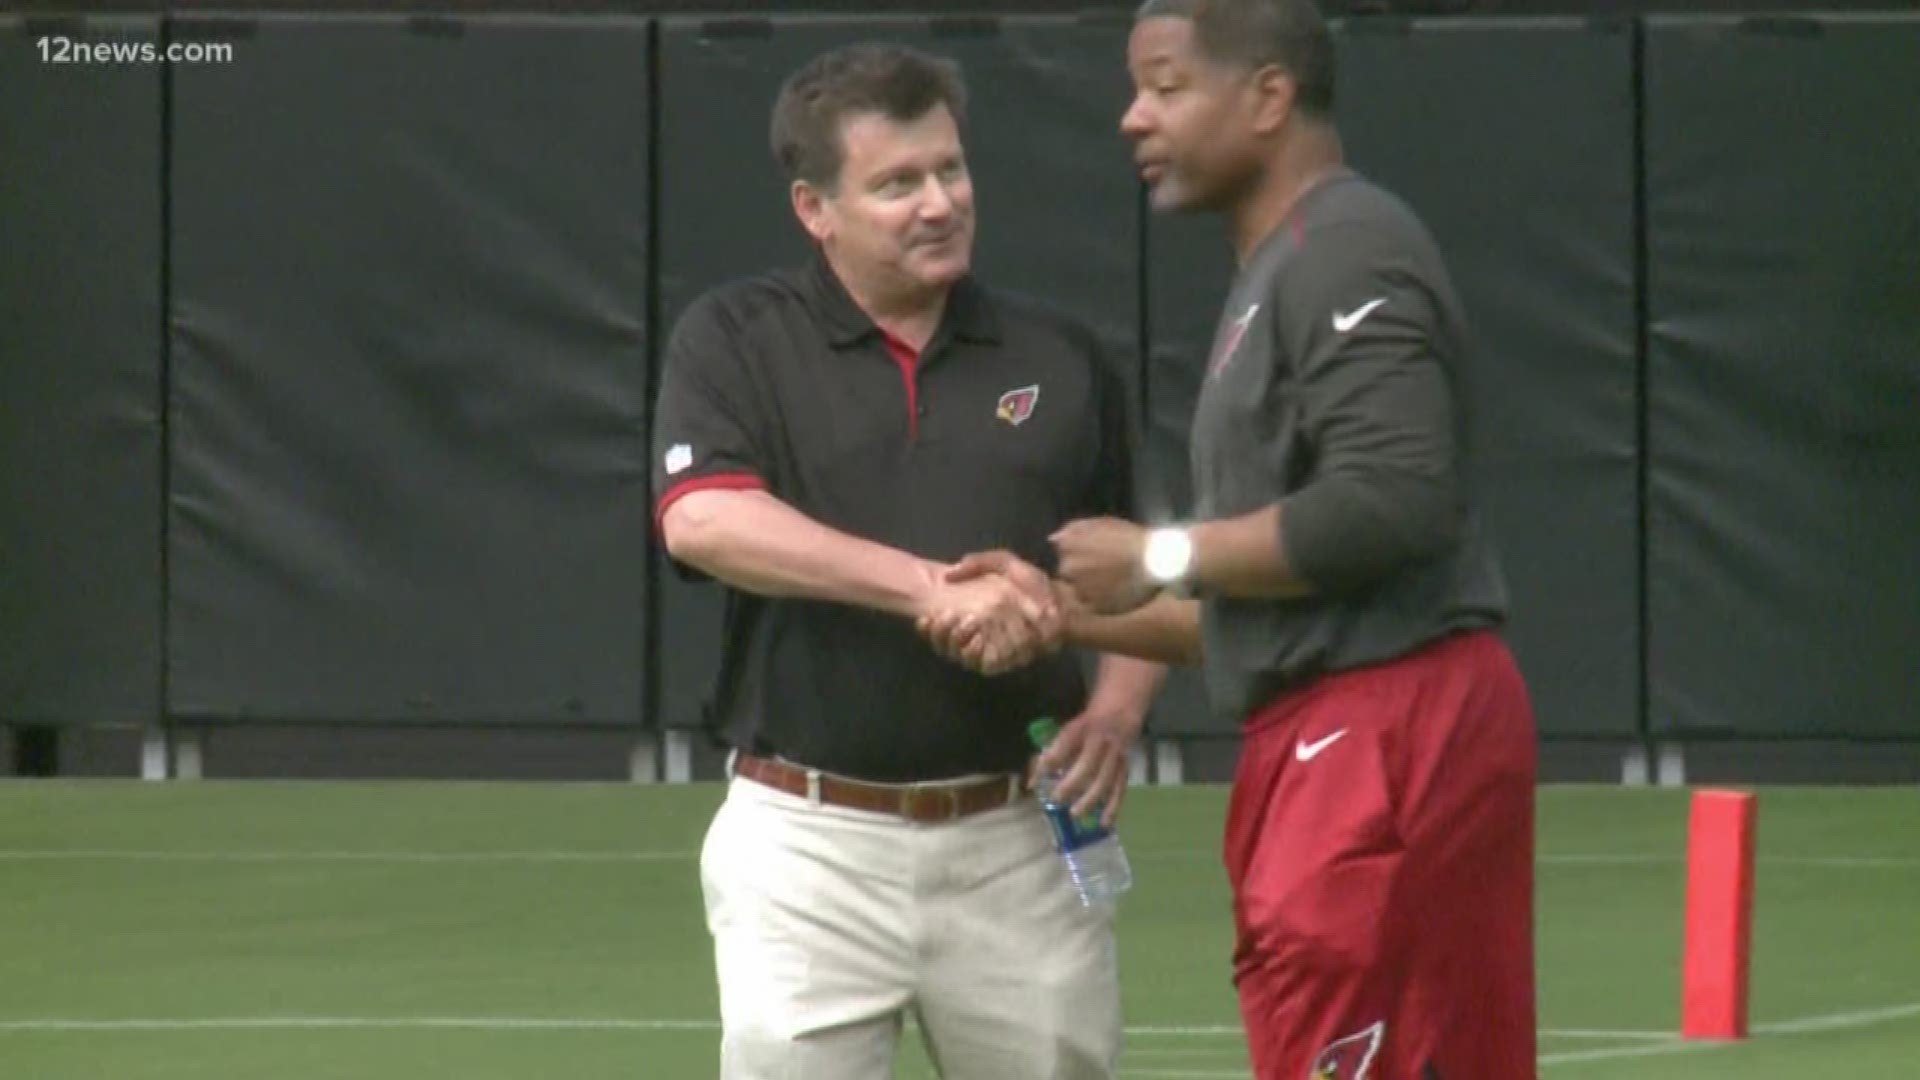 Today was the first day of training camp for the Cardinals, but it wasn't business as usual. Team president Michael Bidwill talked to the media about his response to Keim's DUI arrest.